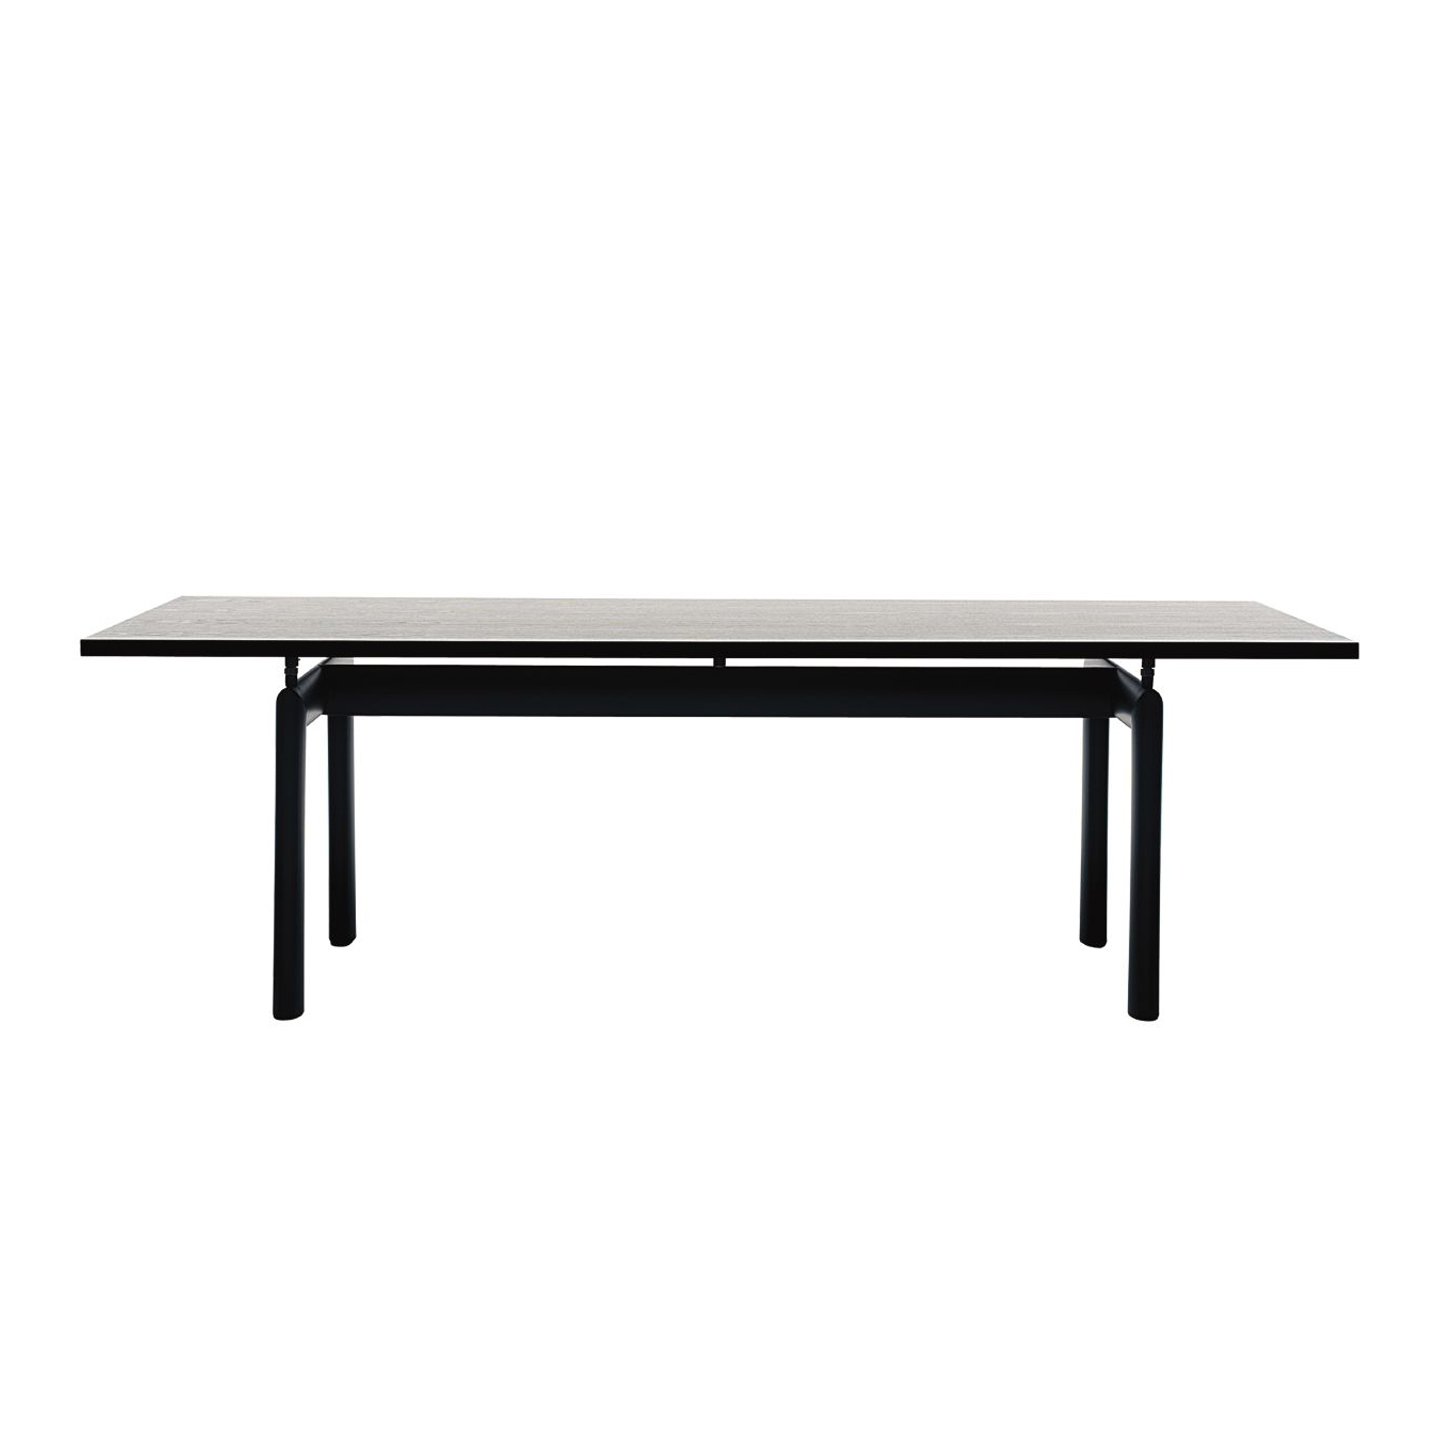 Haworth LC6 Table with rectangular top and black steel base with 4 legs